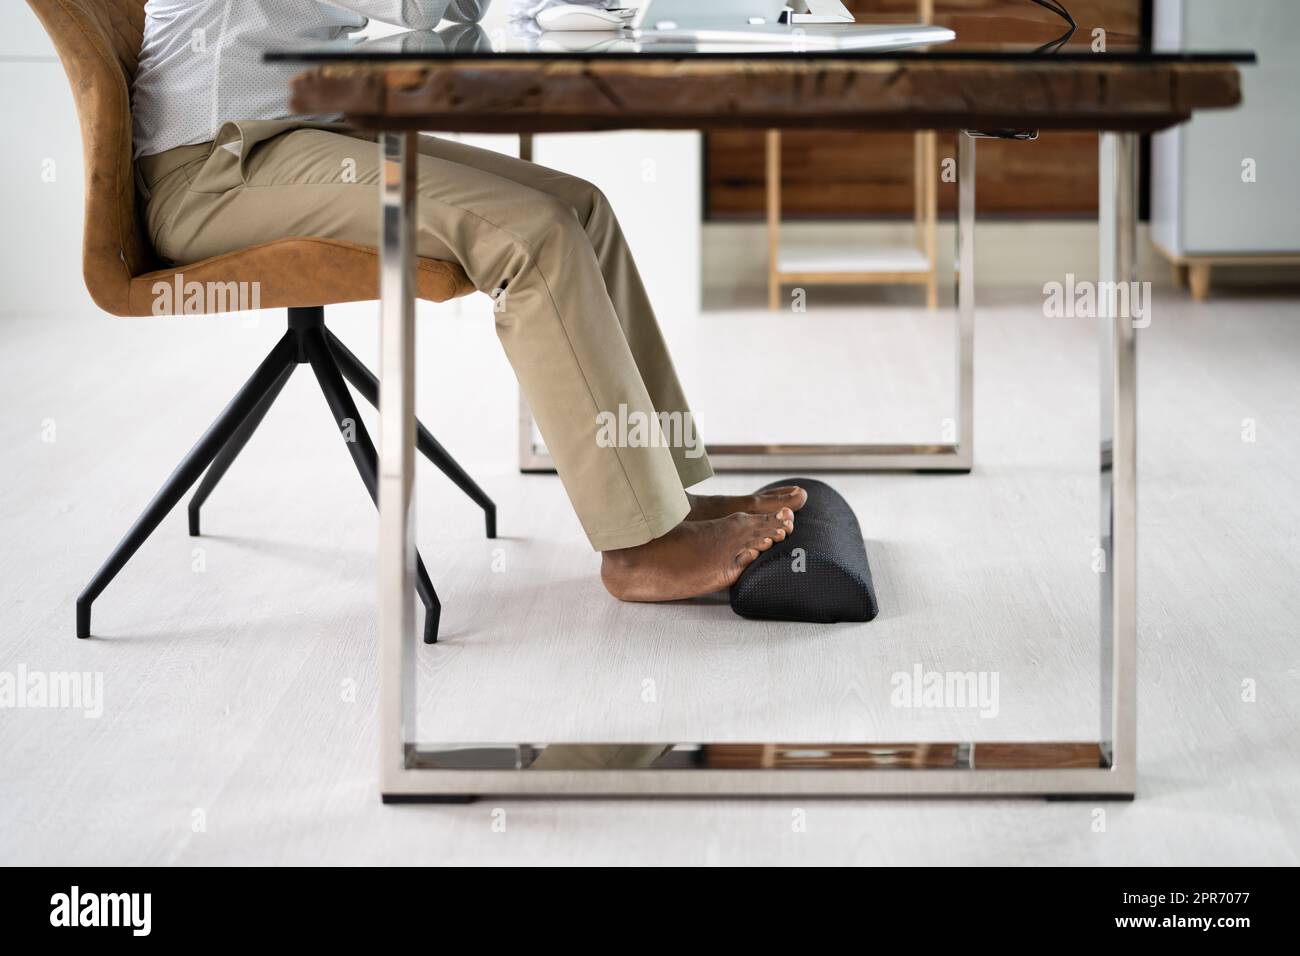 Footrest Against Pain In Office. Shifting Posture Stock Photo